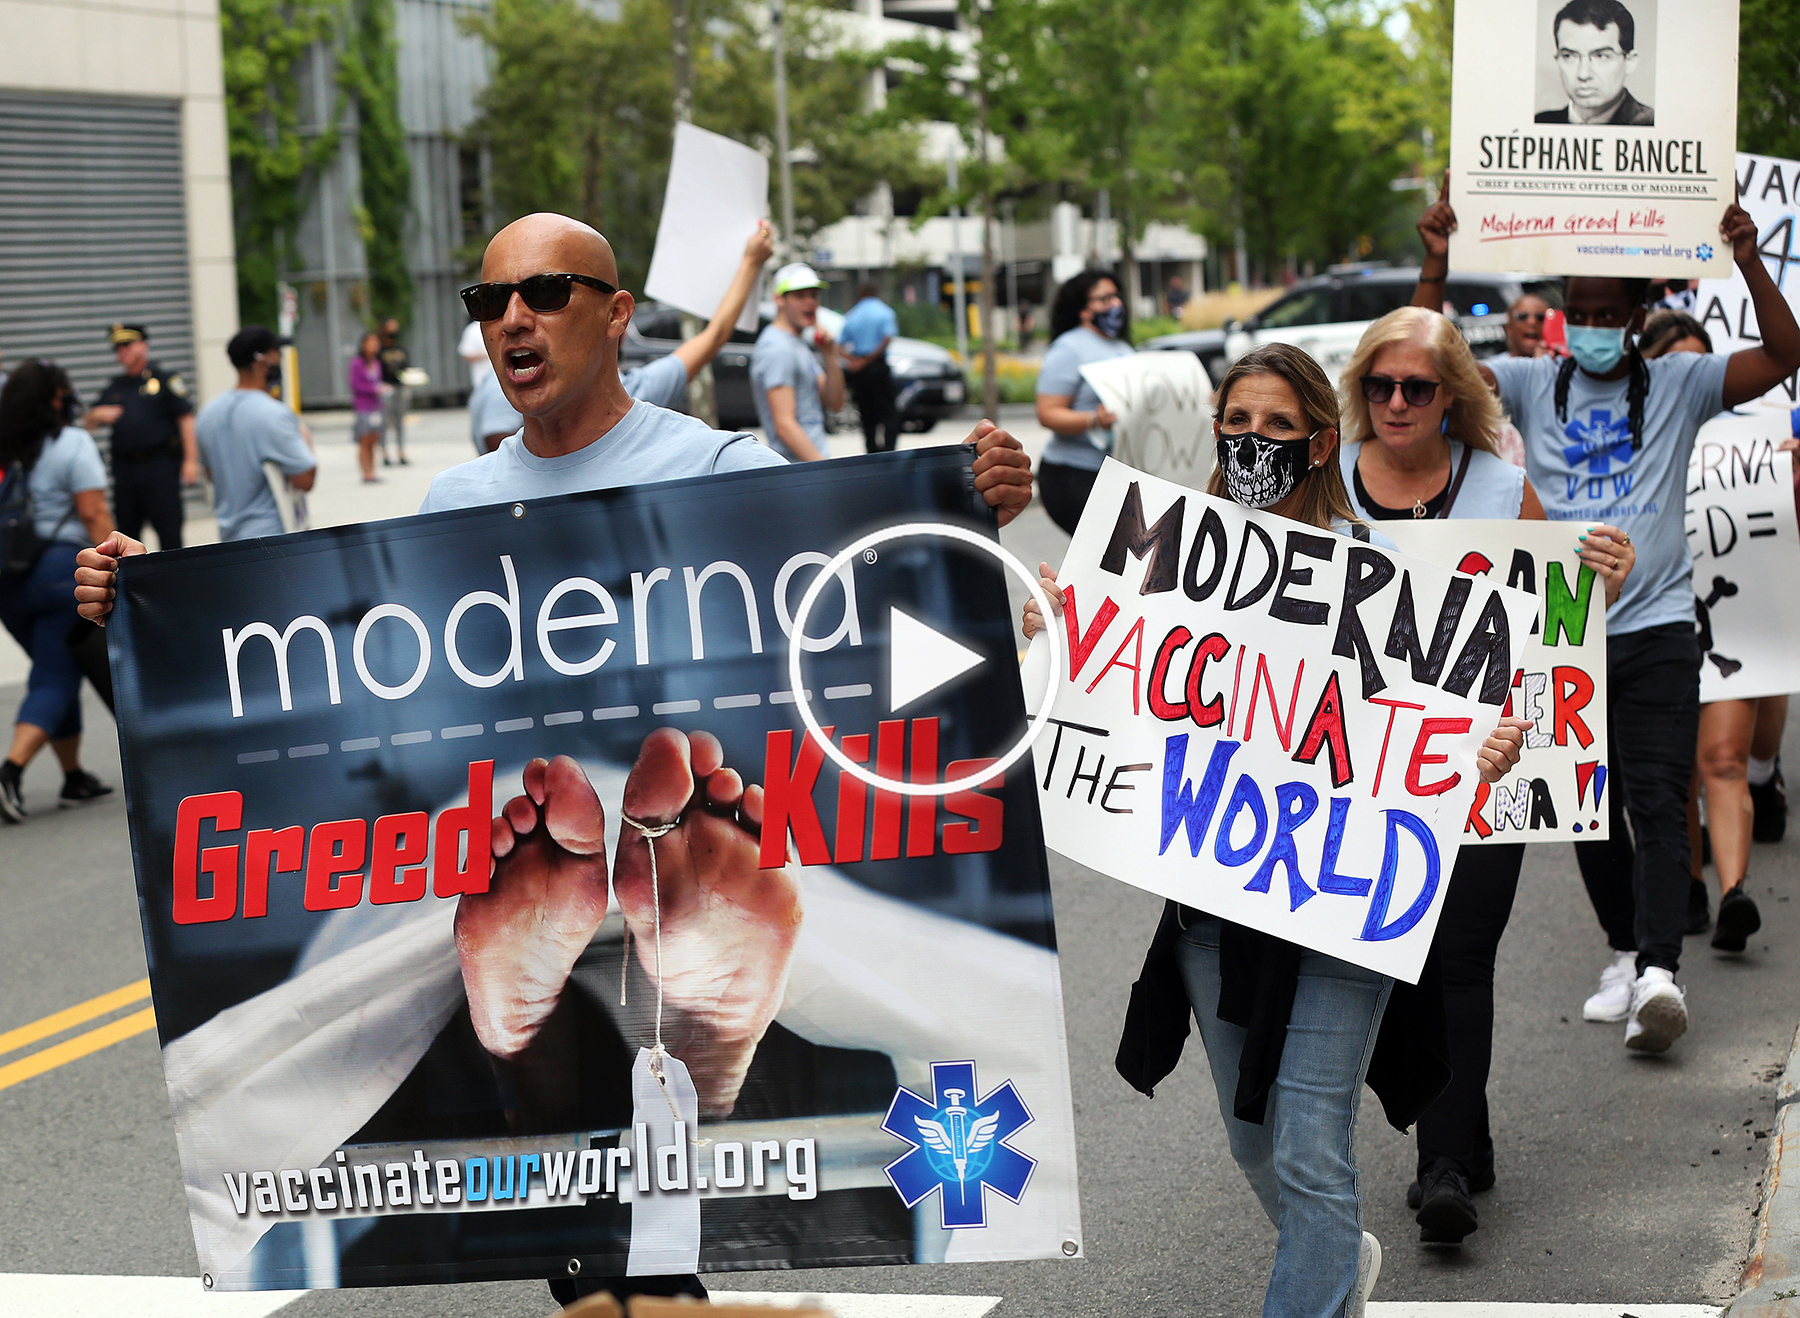 Protestors Push Moderna to Drop Vaccine Prices, Share Technology!